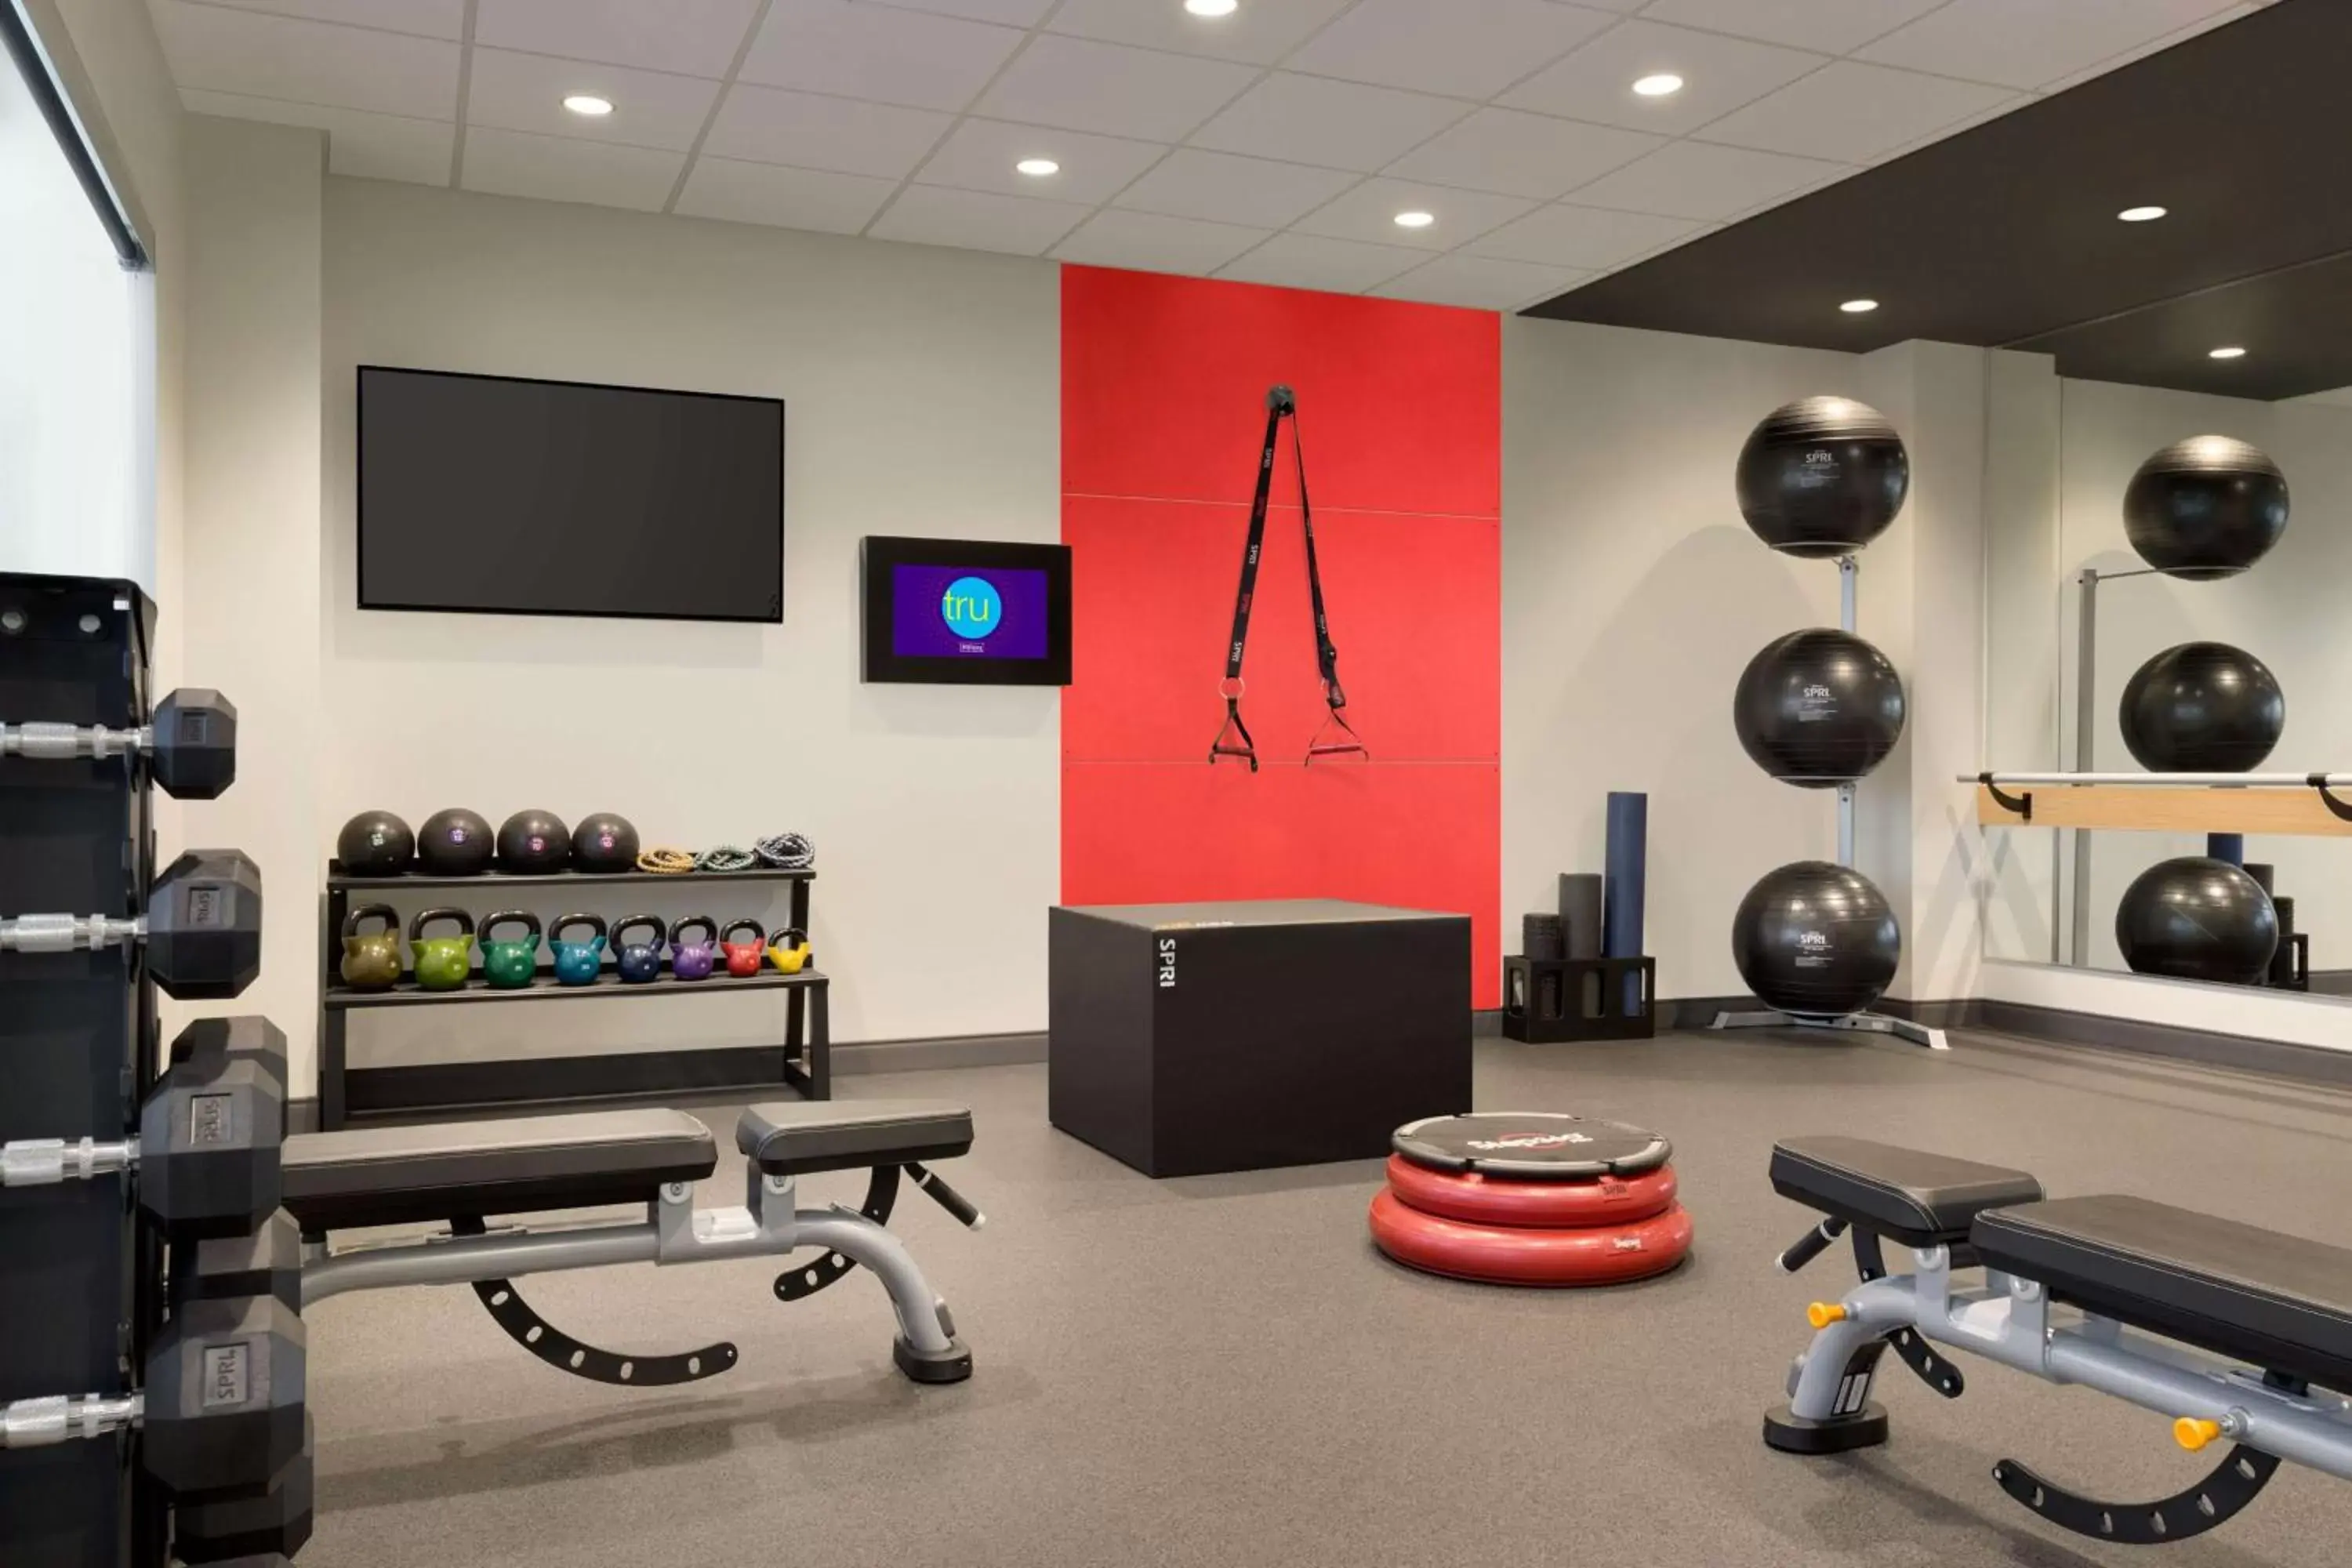 Fitness centre/facilities, Fitness Center/Facilities in Tru By Hilton York Pa